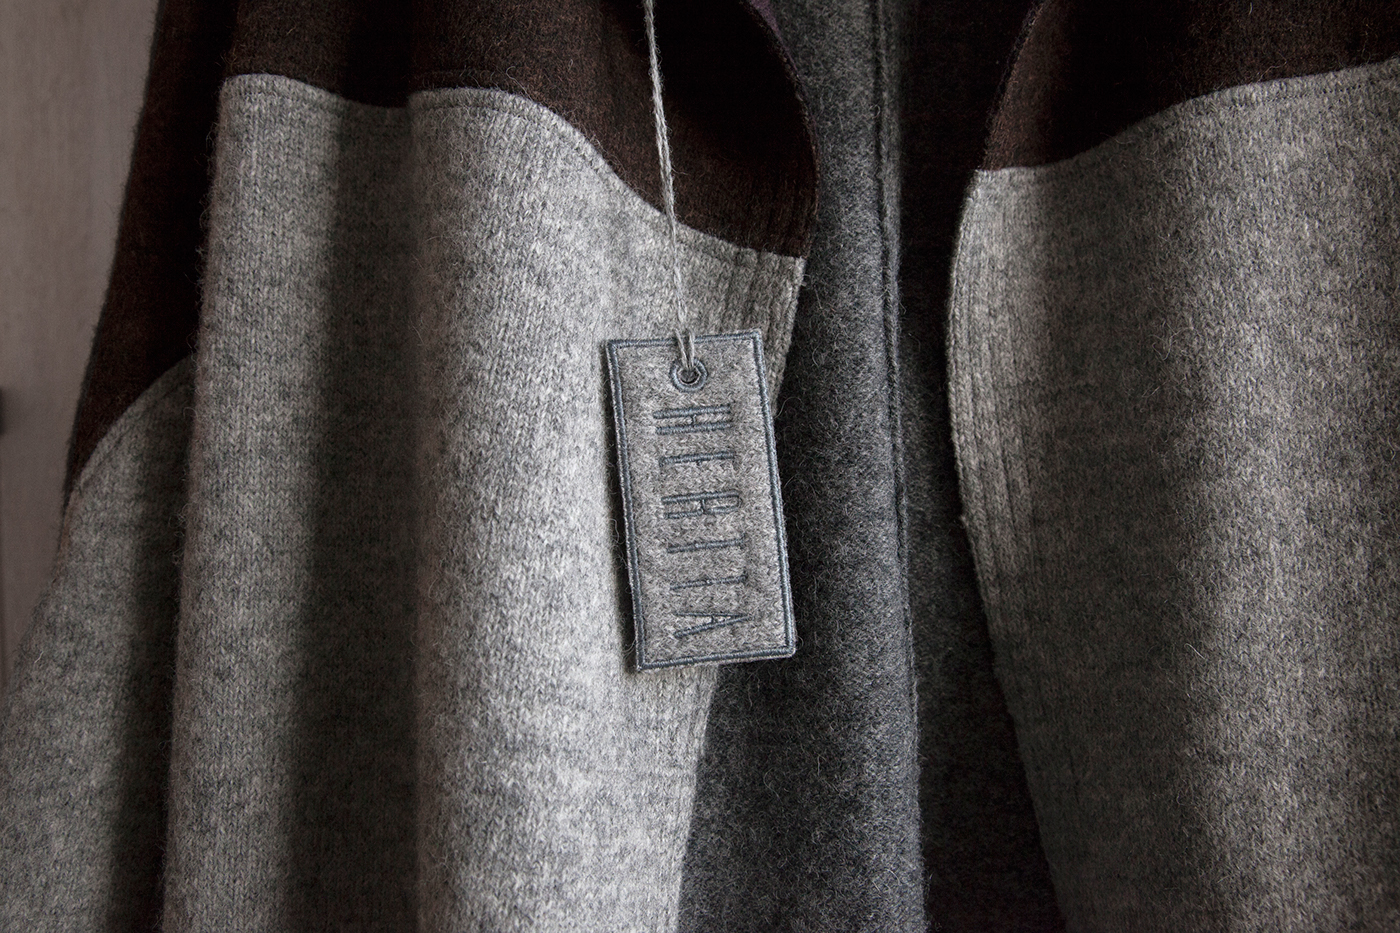 branding  wool knitwear tag embroided product tag